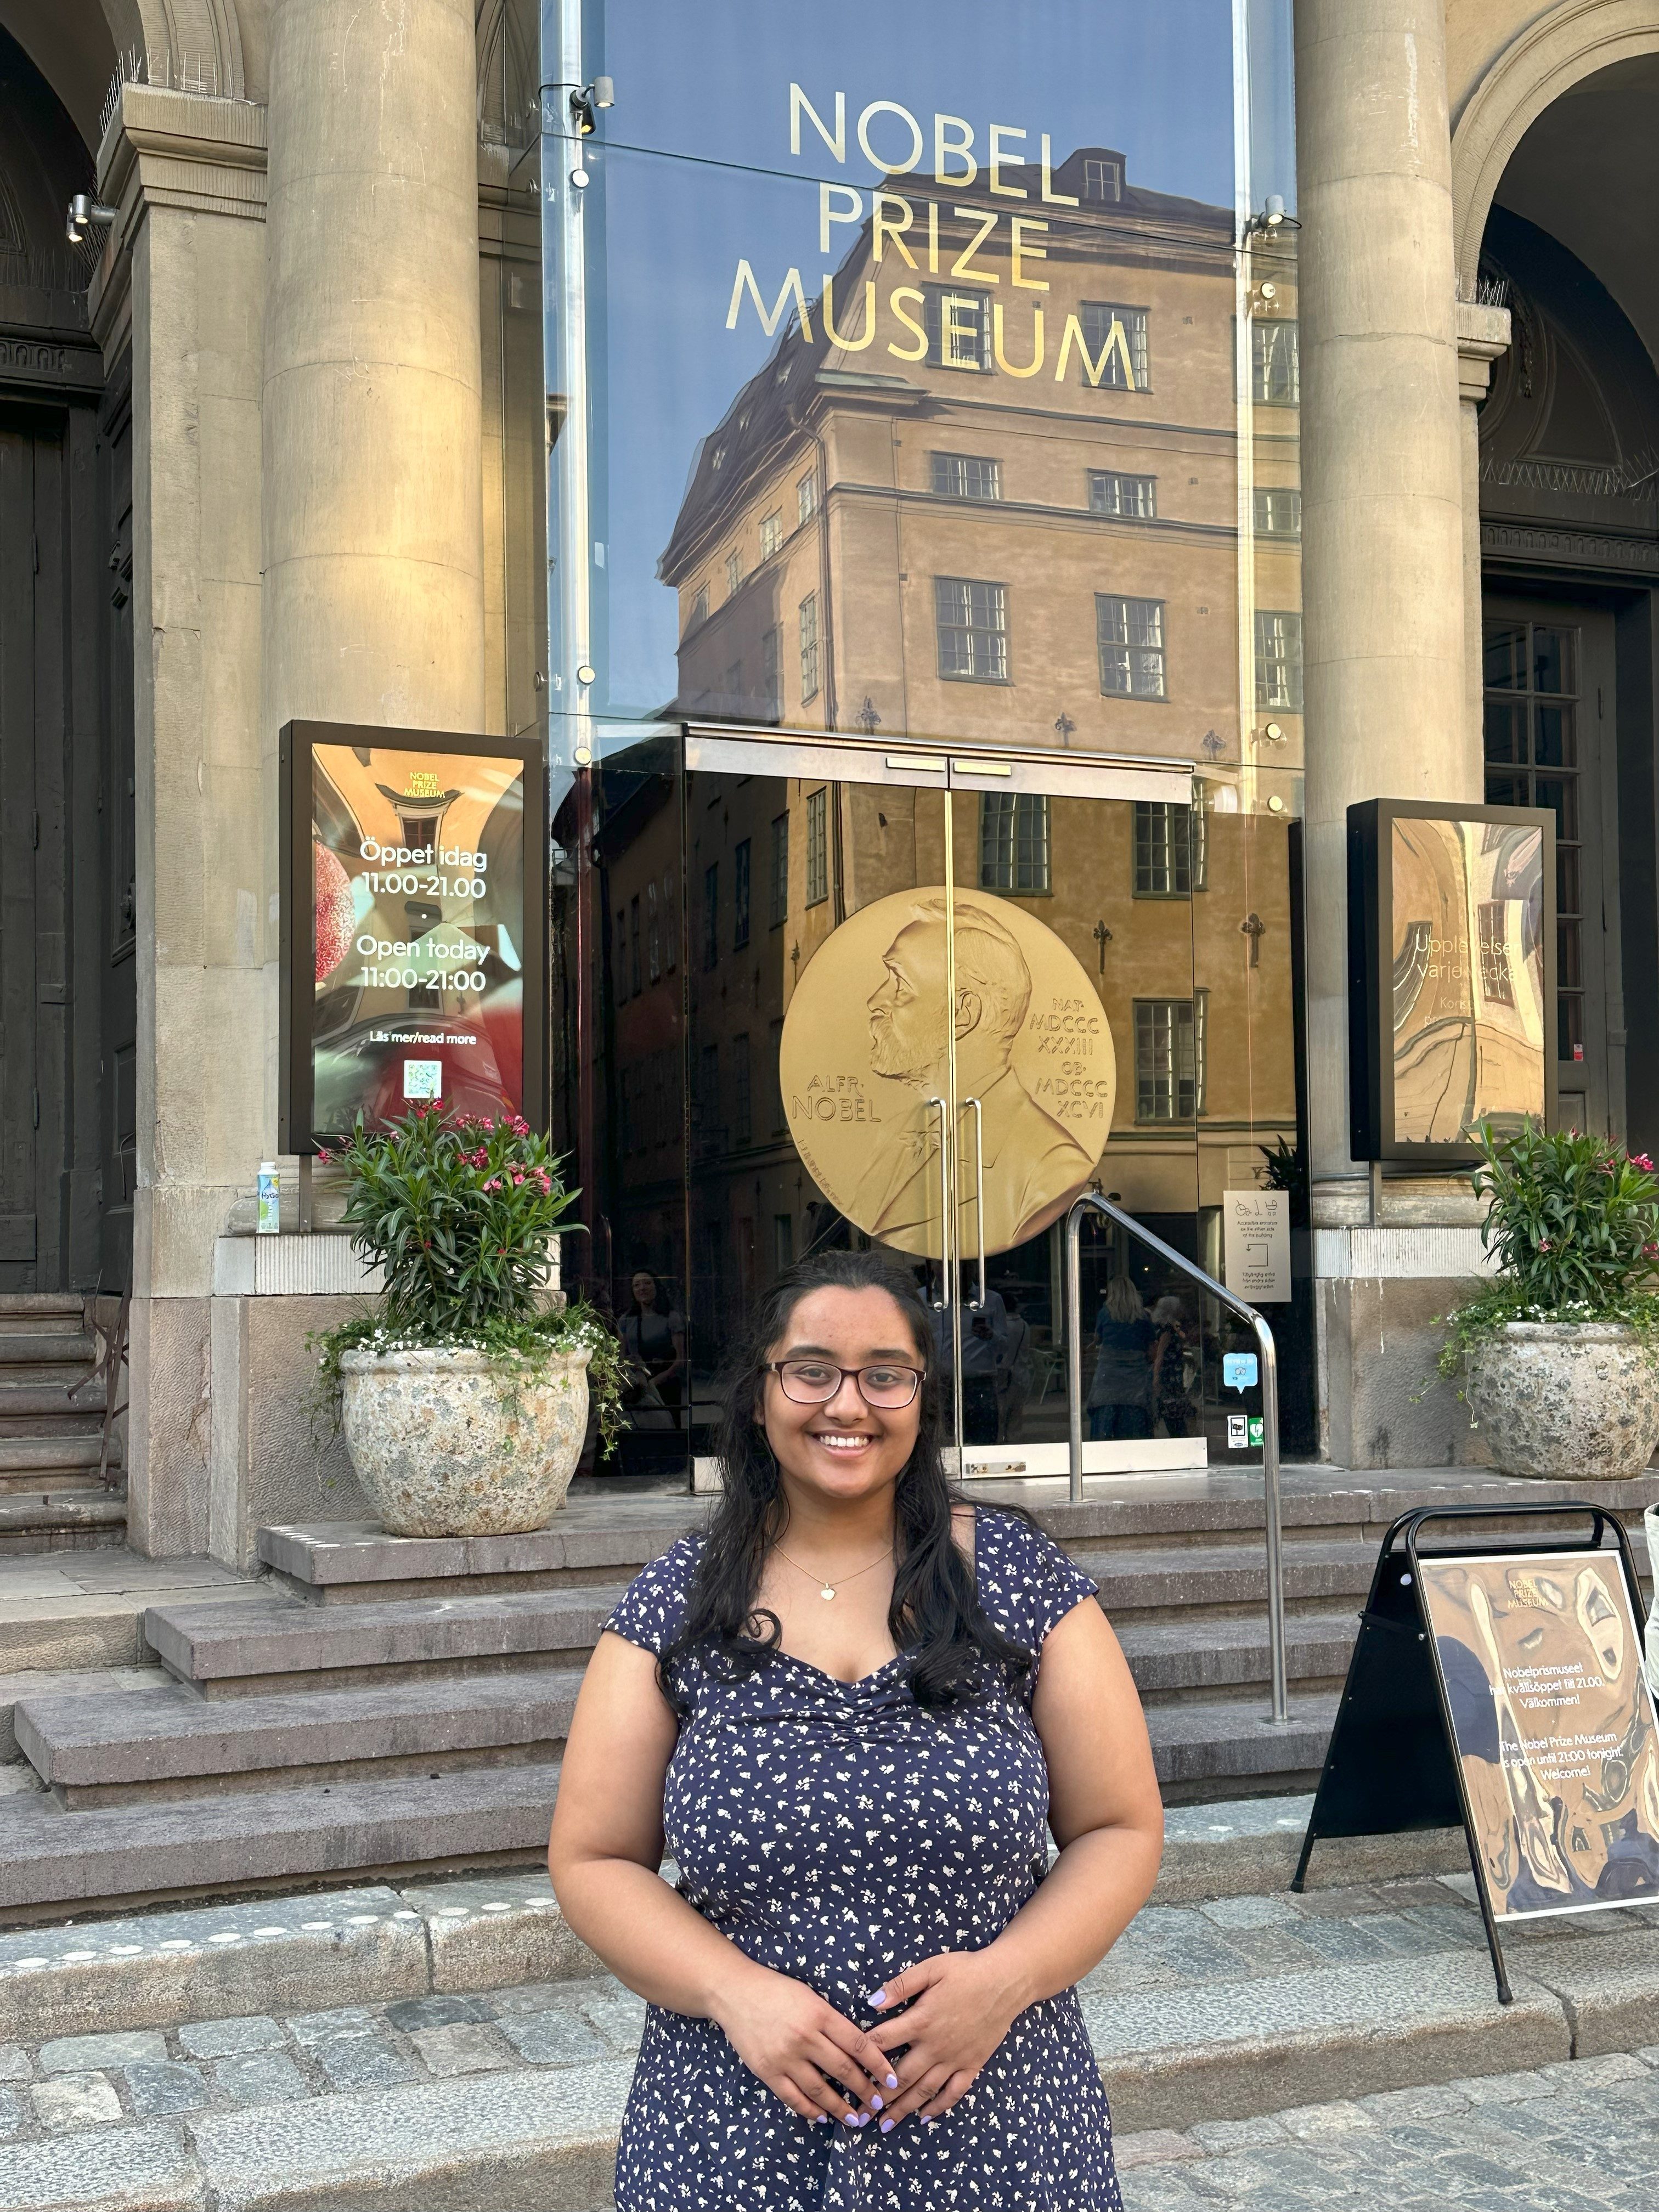 Nobel Prize Museum, Stockholm, Sweden. Pictured: Prema. Caption: Prema standing in from the the doors for the Nobel Prize Museum, an area highlighting the history, the founder, and the various discoveries of Nobel Prize Winners